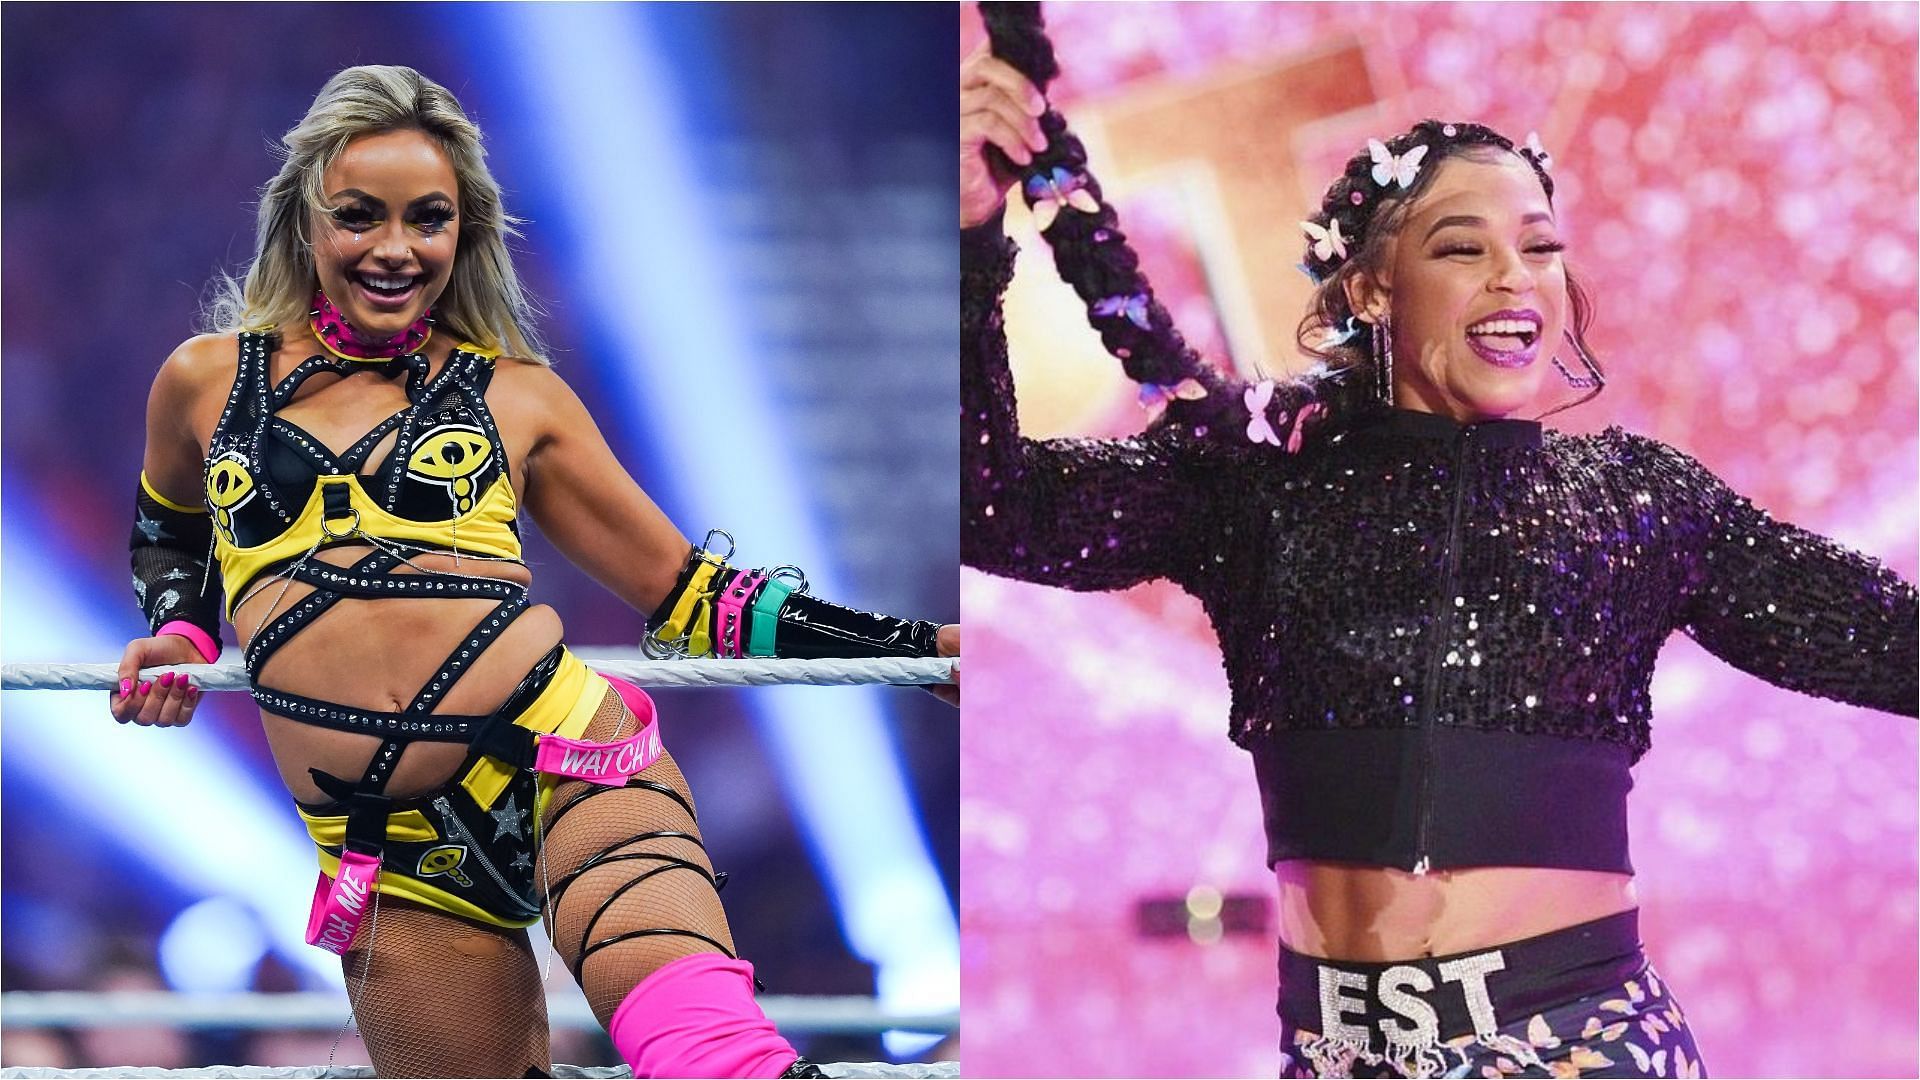 Could Liv Morgan and Bianca Belair possibly make their return?